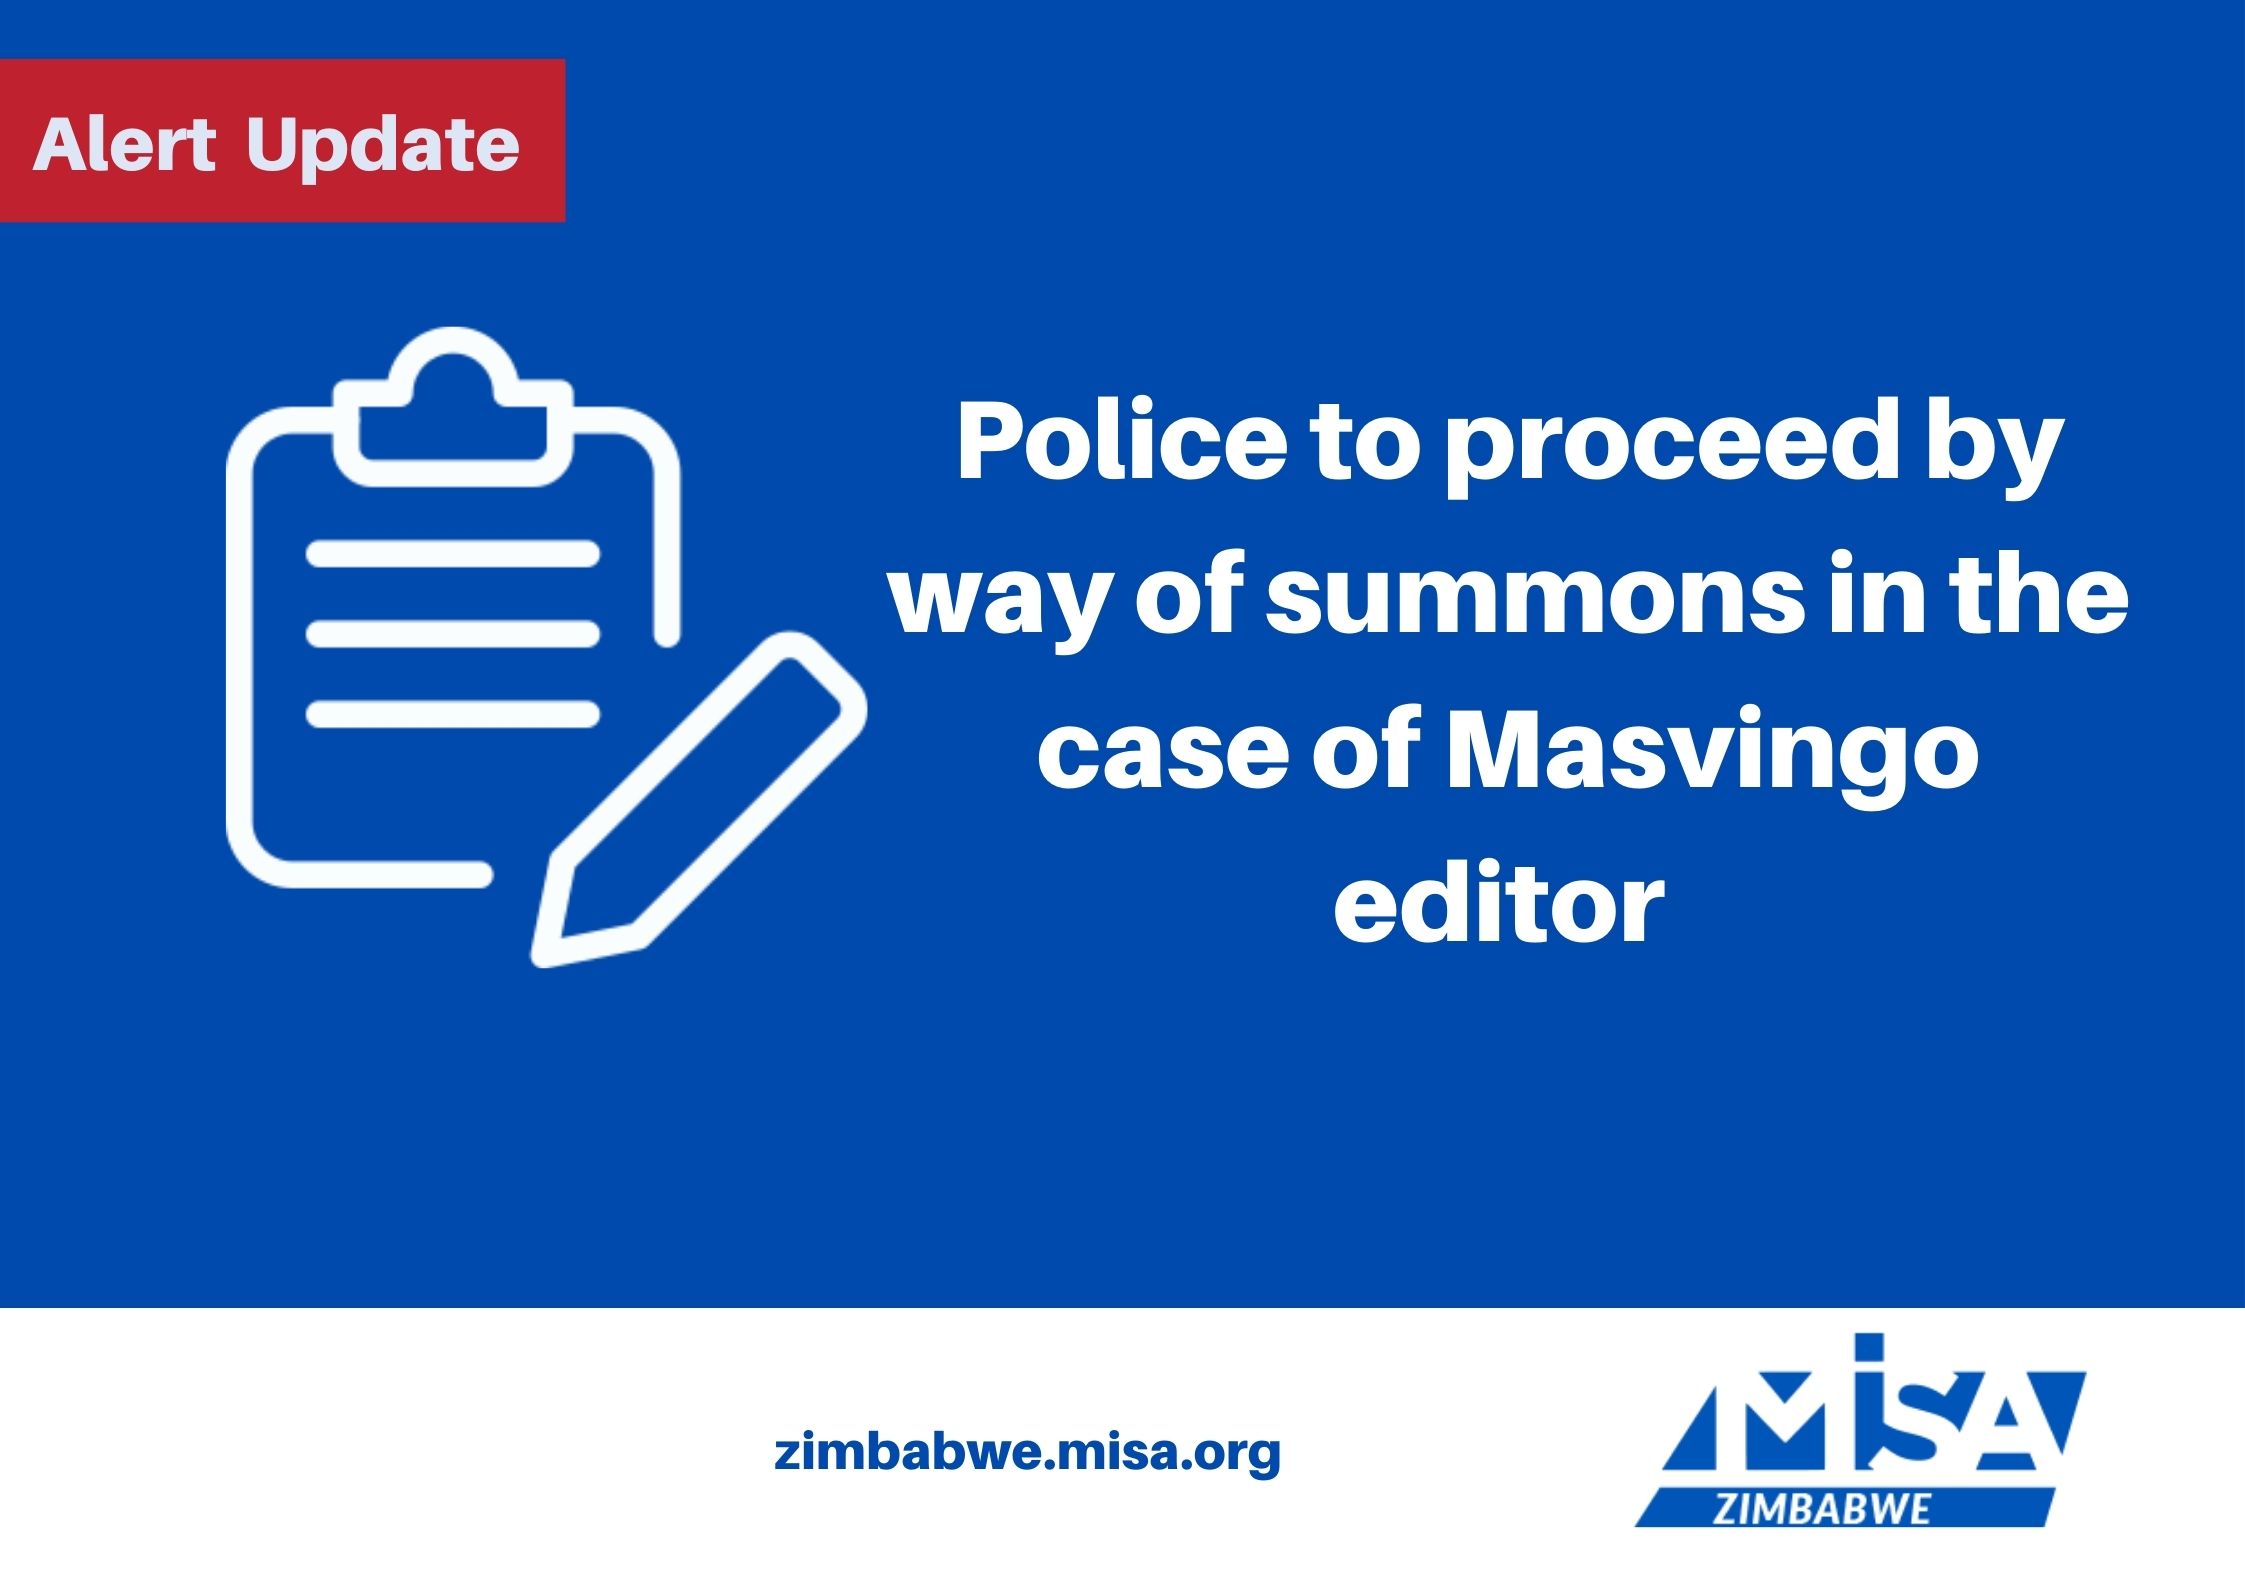 Police to proceed by way of summons in the case of Masvingo editor 